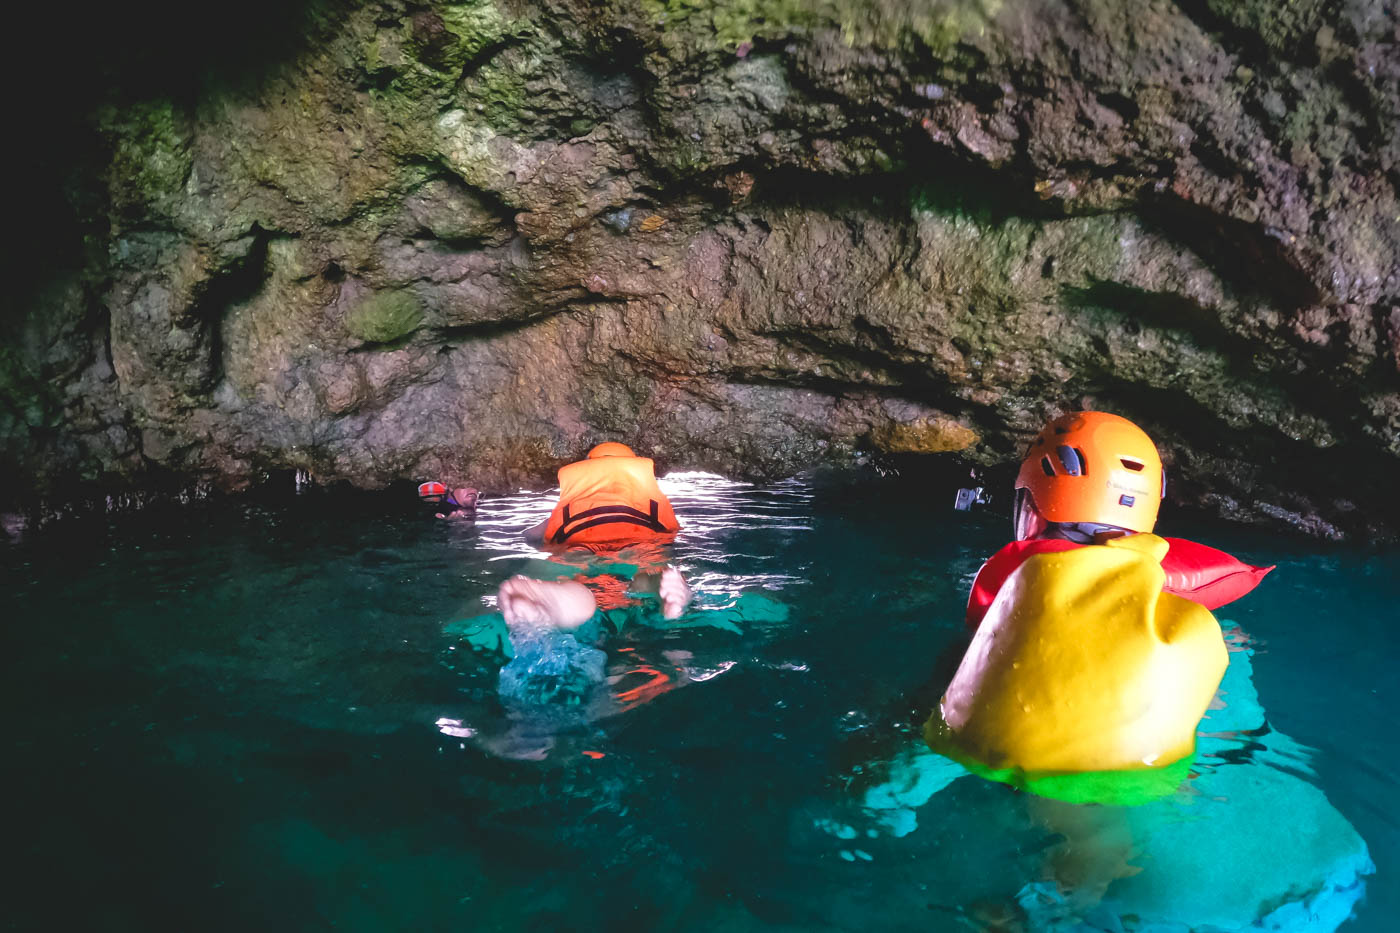 People equipped with lifejackets swimming through the cave to get to Hidden beach.